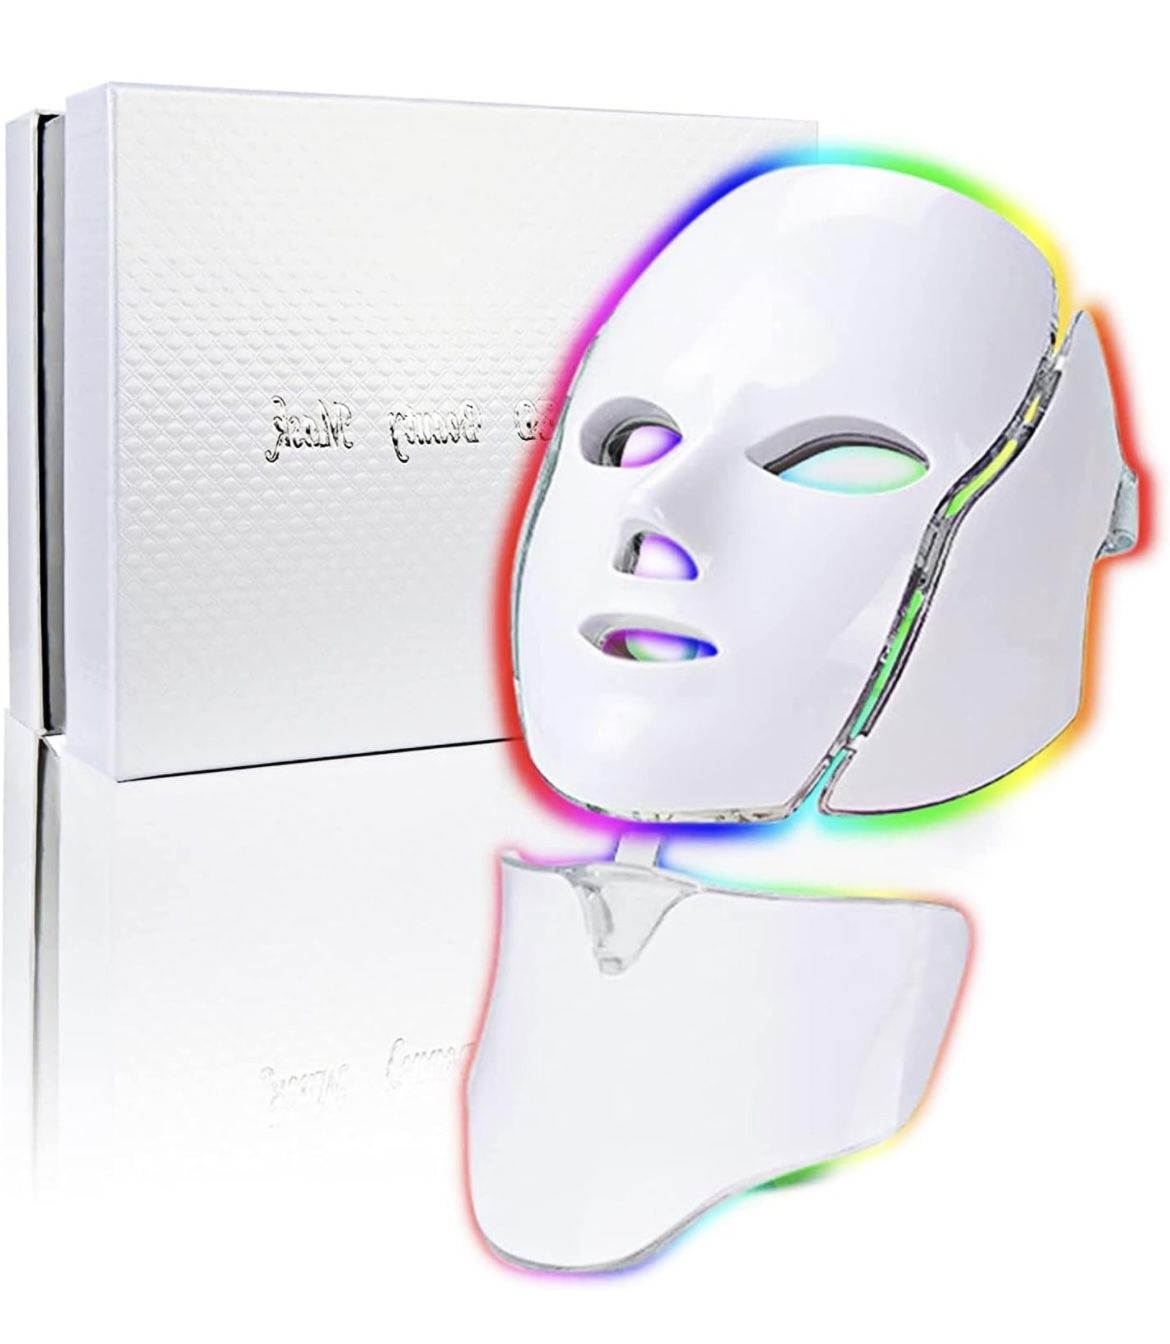 Amblery Led Face Mask Light Therapy, 7 Colors LED Light Therapy Mask for Facial Skin Care, Colorful LED Beauty Mask, Led Mask Therapy Facial.